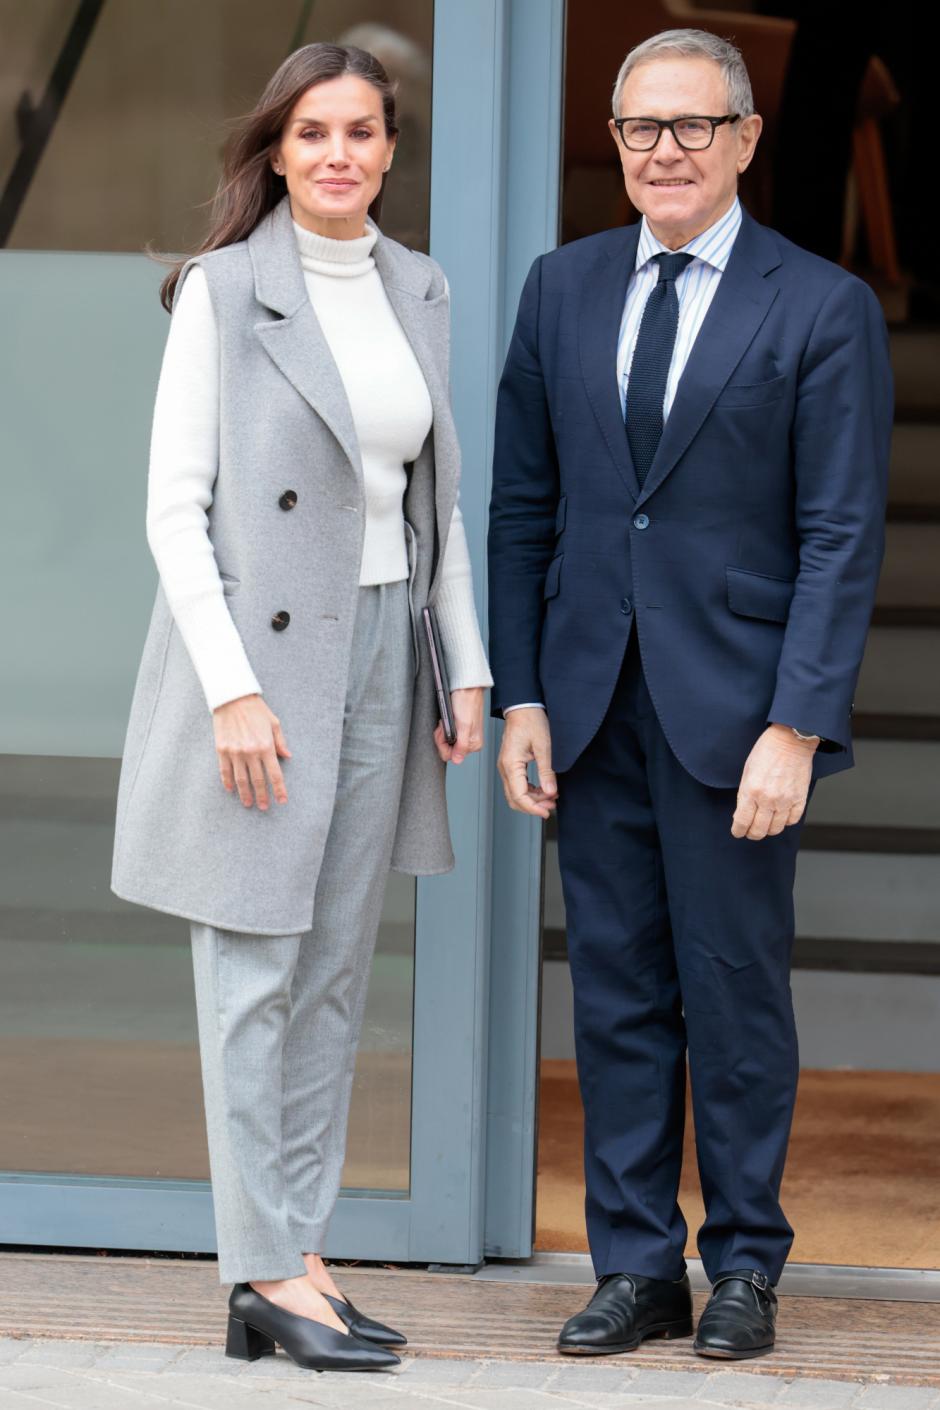 Spanish Queen Letizia and Ramon Reyes during working meeting with the Asociacion Española Contra el Cancer (AECC) in Madrid on Tuesday, 24 January 2023.